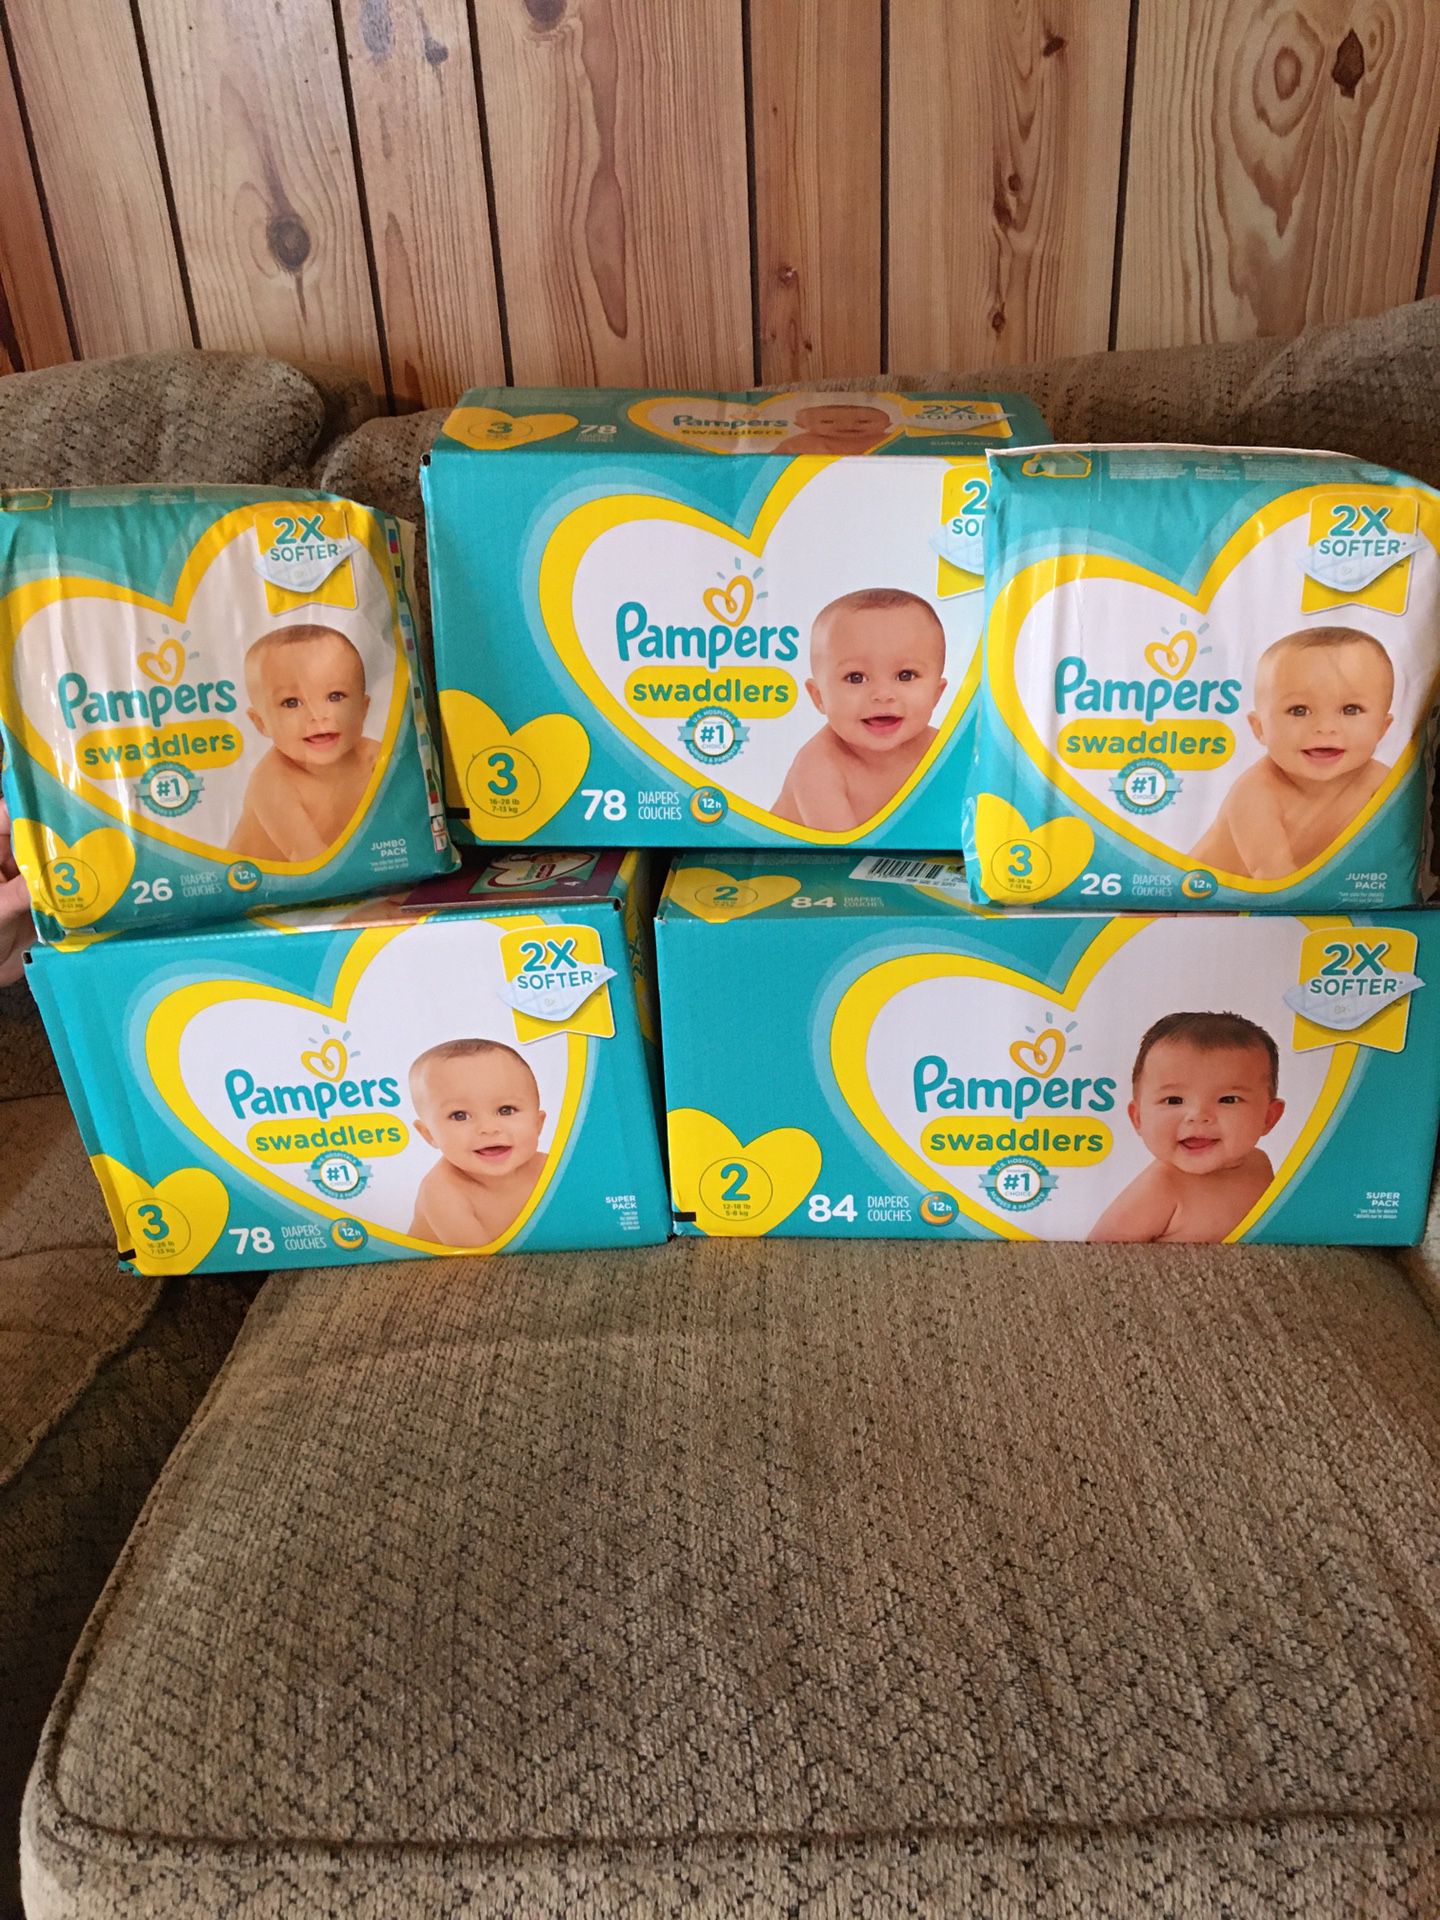 Pampers diapers/ baby wipes